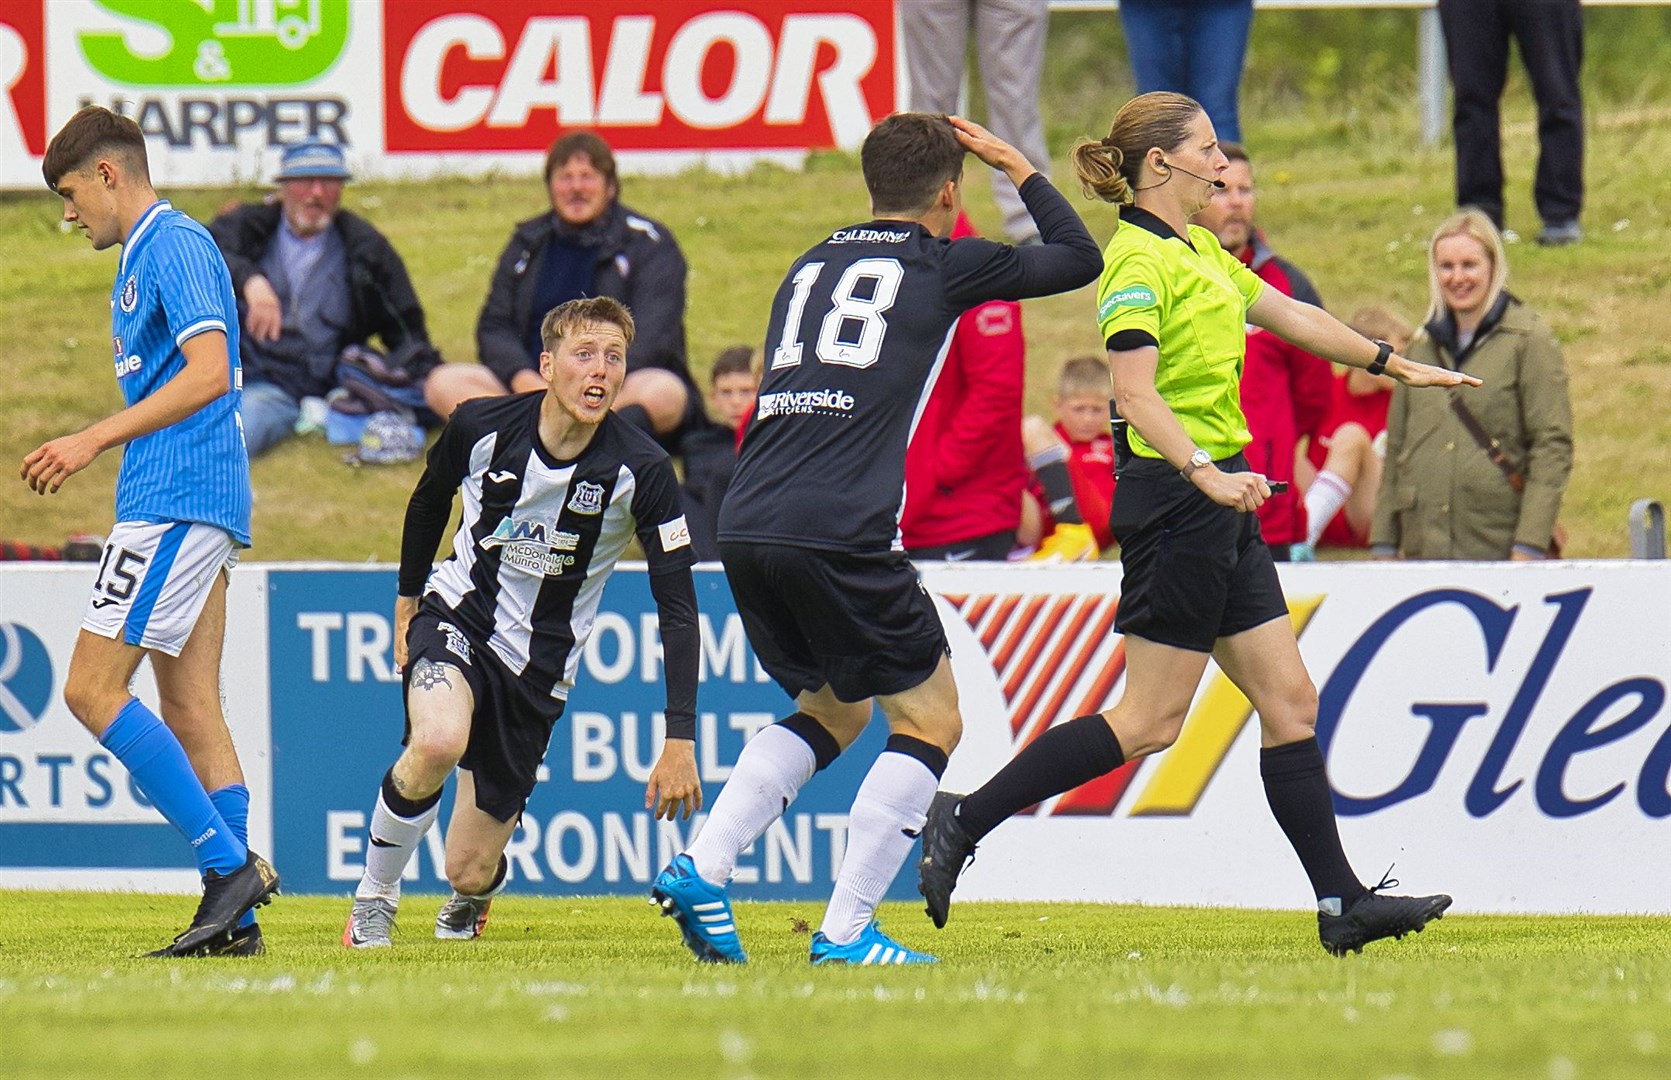 Kane Hester claims for a penalty in vain against Stranraer. Photo: Bob Crombie